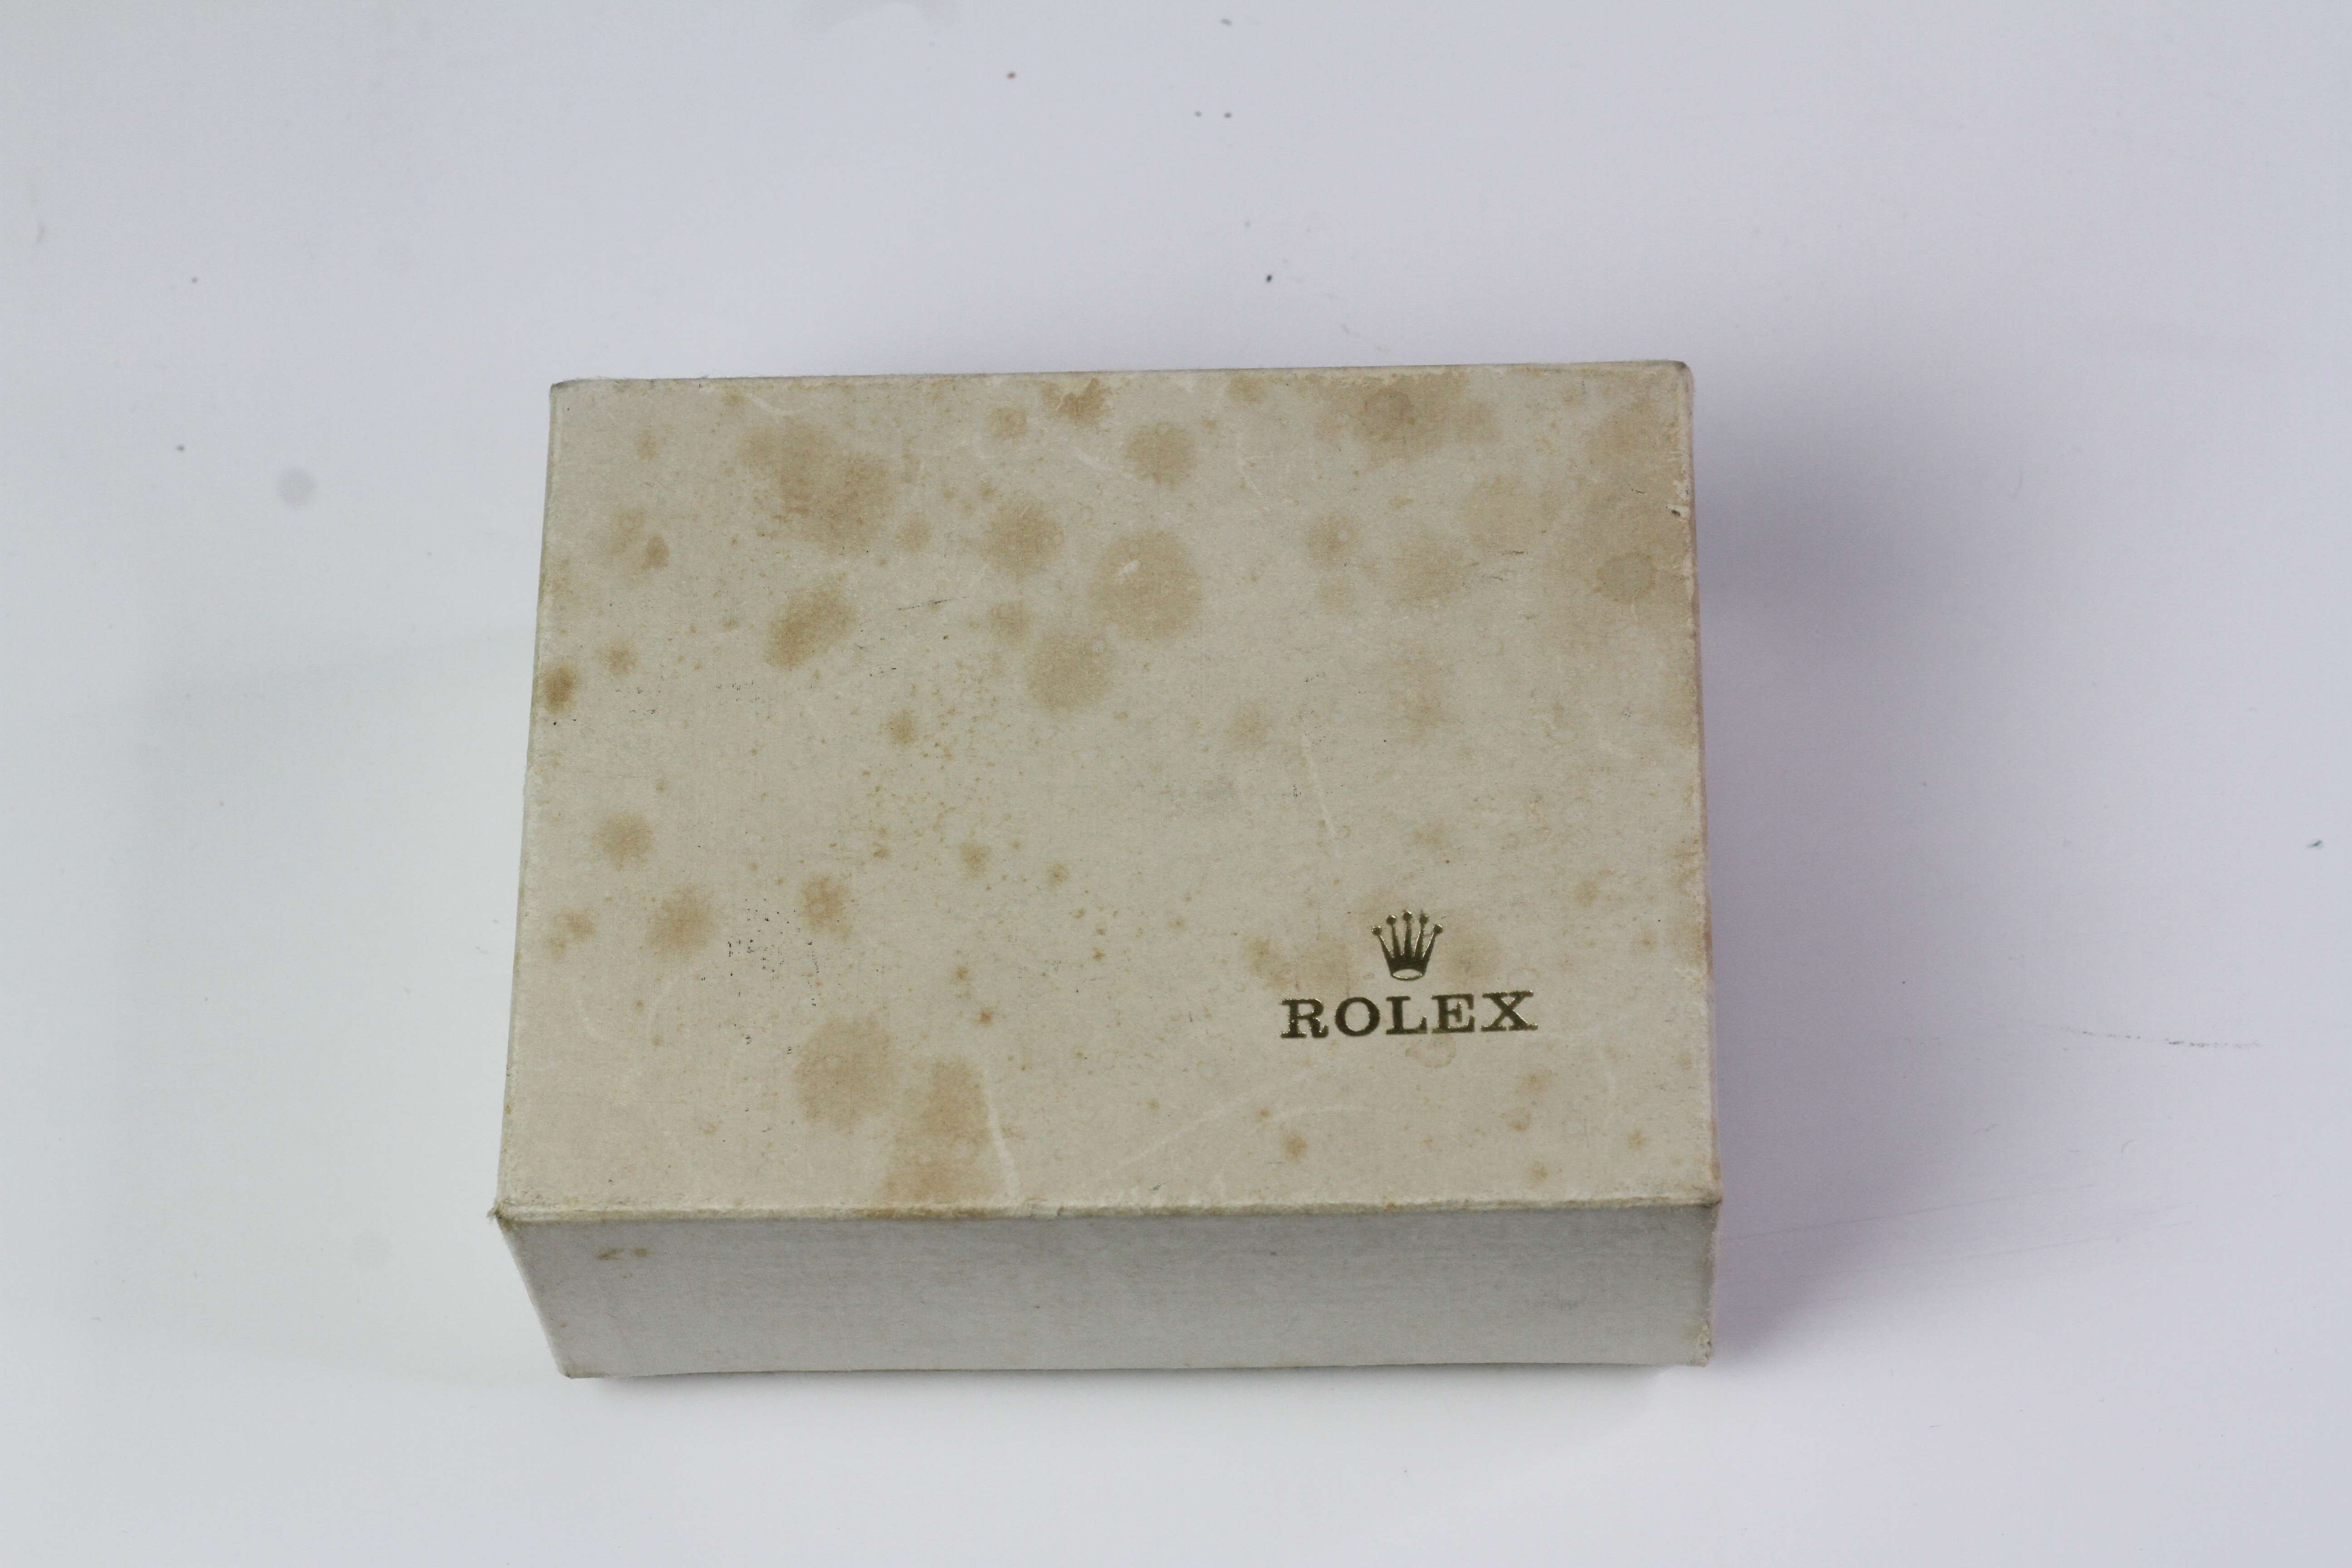 *To Be Sold Without Reserve* Vintage Rolex Coffin lid, inner and outer box